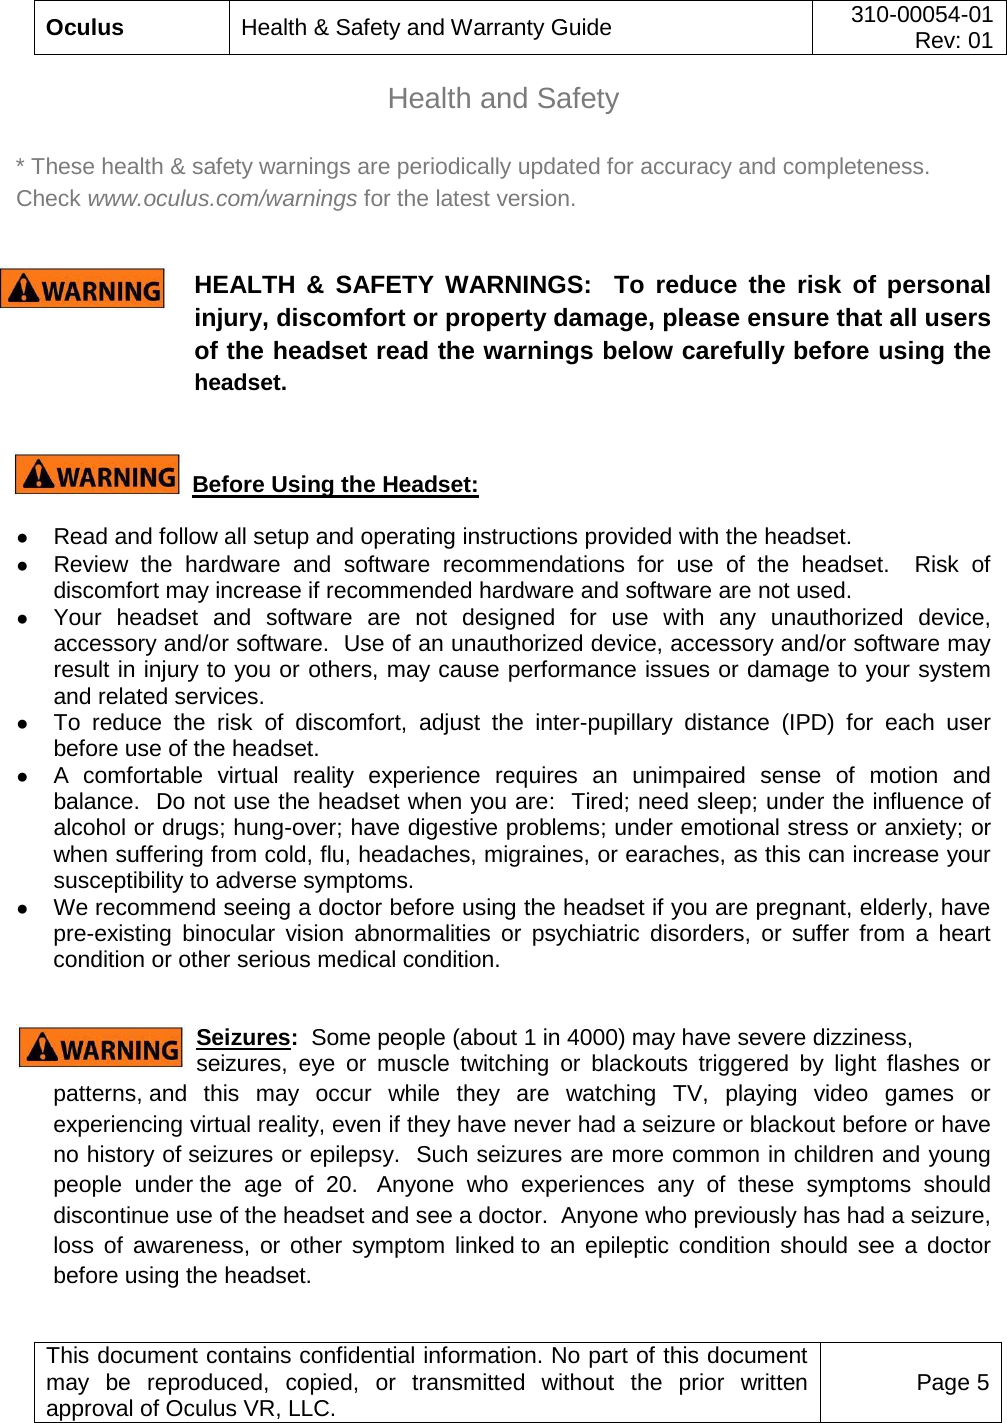  Oculus Health &amp; Safety and Warranty Guide 310-00054-01  Rev: 01   This document contains confidential information. No part of this document may be reproduced, copied, or transmitted without the prior written approval of Oculus VR, LLC. Page 5  Health and Safety  * These health &amp; safety warnings are periodically updated for accuracy and completeness.  Check www.oculus.com/warnings for the latest version.  HEALTH &amp; SAFETY WARNINGS:  To reduce the risk of personal injury, discomfort or property damage, please ensure that all users of the headset read the warnings below carefully before using the headset.  Before Using the Headset: ● Read and follow all setup and operating instructions provided with the headset.   ● Review the hardware and software recommendations for use of the headset.  Risk of discomfort may increase if recommended hardware and software are not used. ● Your headset and software are not designed for use with any unauthorized device, accessory and/or software.  Use of an unauthorized device, accessory and/or software may result in injury to you or others, may cause performance issues or damage to your system and related services. ● To reduce the risk of discomfort, adjust the inter-pupillary distance (IPD) for each user before use of the headset. ● A comfortable virtual reality experience requires an unimpaired sense of motion and balance.  Do not use the headset when you are:  Tired; need sleep; under the influence of alcohol or drugs; hung-over; have digestive problems; under emotional stress or anxiety; or when suffering from cold, flu, headaches, migraines, or earaches, as this can increase your susceptibility to adverse symptoms. ● We recommend seeing a doctor before using the headset if you are pregnant, elderly, have pre-existing binocular vision abnormalities or psychiatric disorders, or suffer from a heart condition or other serious medical condition.  Seizures:  Some people (about 1 in 4000) may have severe dizziness,  seizures, eye or muscle twitching or blackouts triggered by light flashes or patterns, and this may occur while they are watching TV, playing video games or experiencing virtual reality, even if they have never had a seizure or blackout before or have no history of seizures or epilepsy.  Such seizures are more common in children and young people under the age of 20.   Anyone who experiences any of these symptoms should discontinue use of the headset and see a doctor.  Anyone who previously has had a seizure, loss of awareness, or other symptom linked to an epileptic condition should see a doctor before using the headset. 